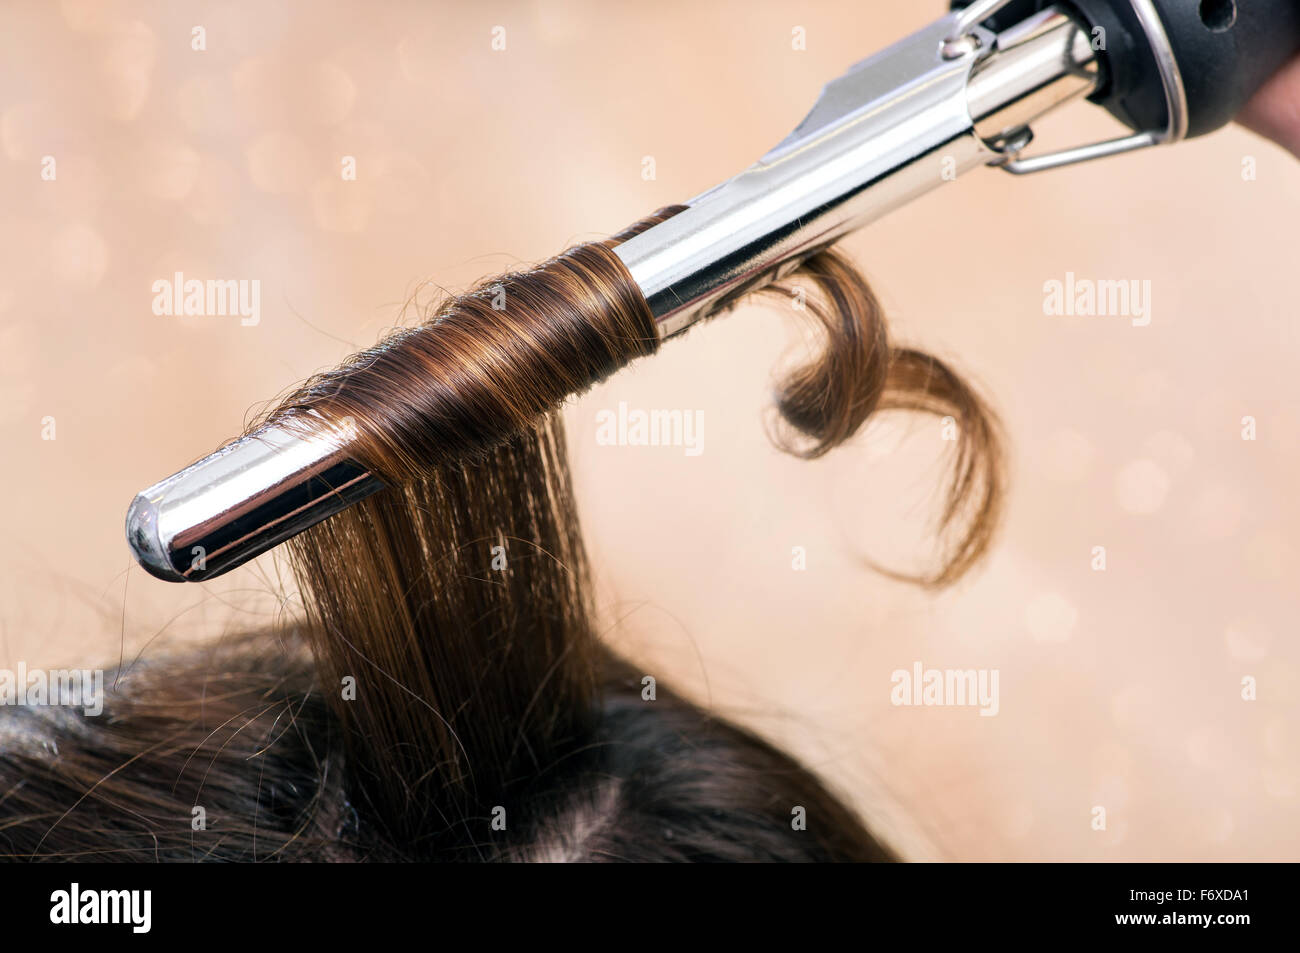 Hairstylist using a curling iron to firm ringlets in the long brown hair of a female client Stock Photo